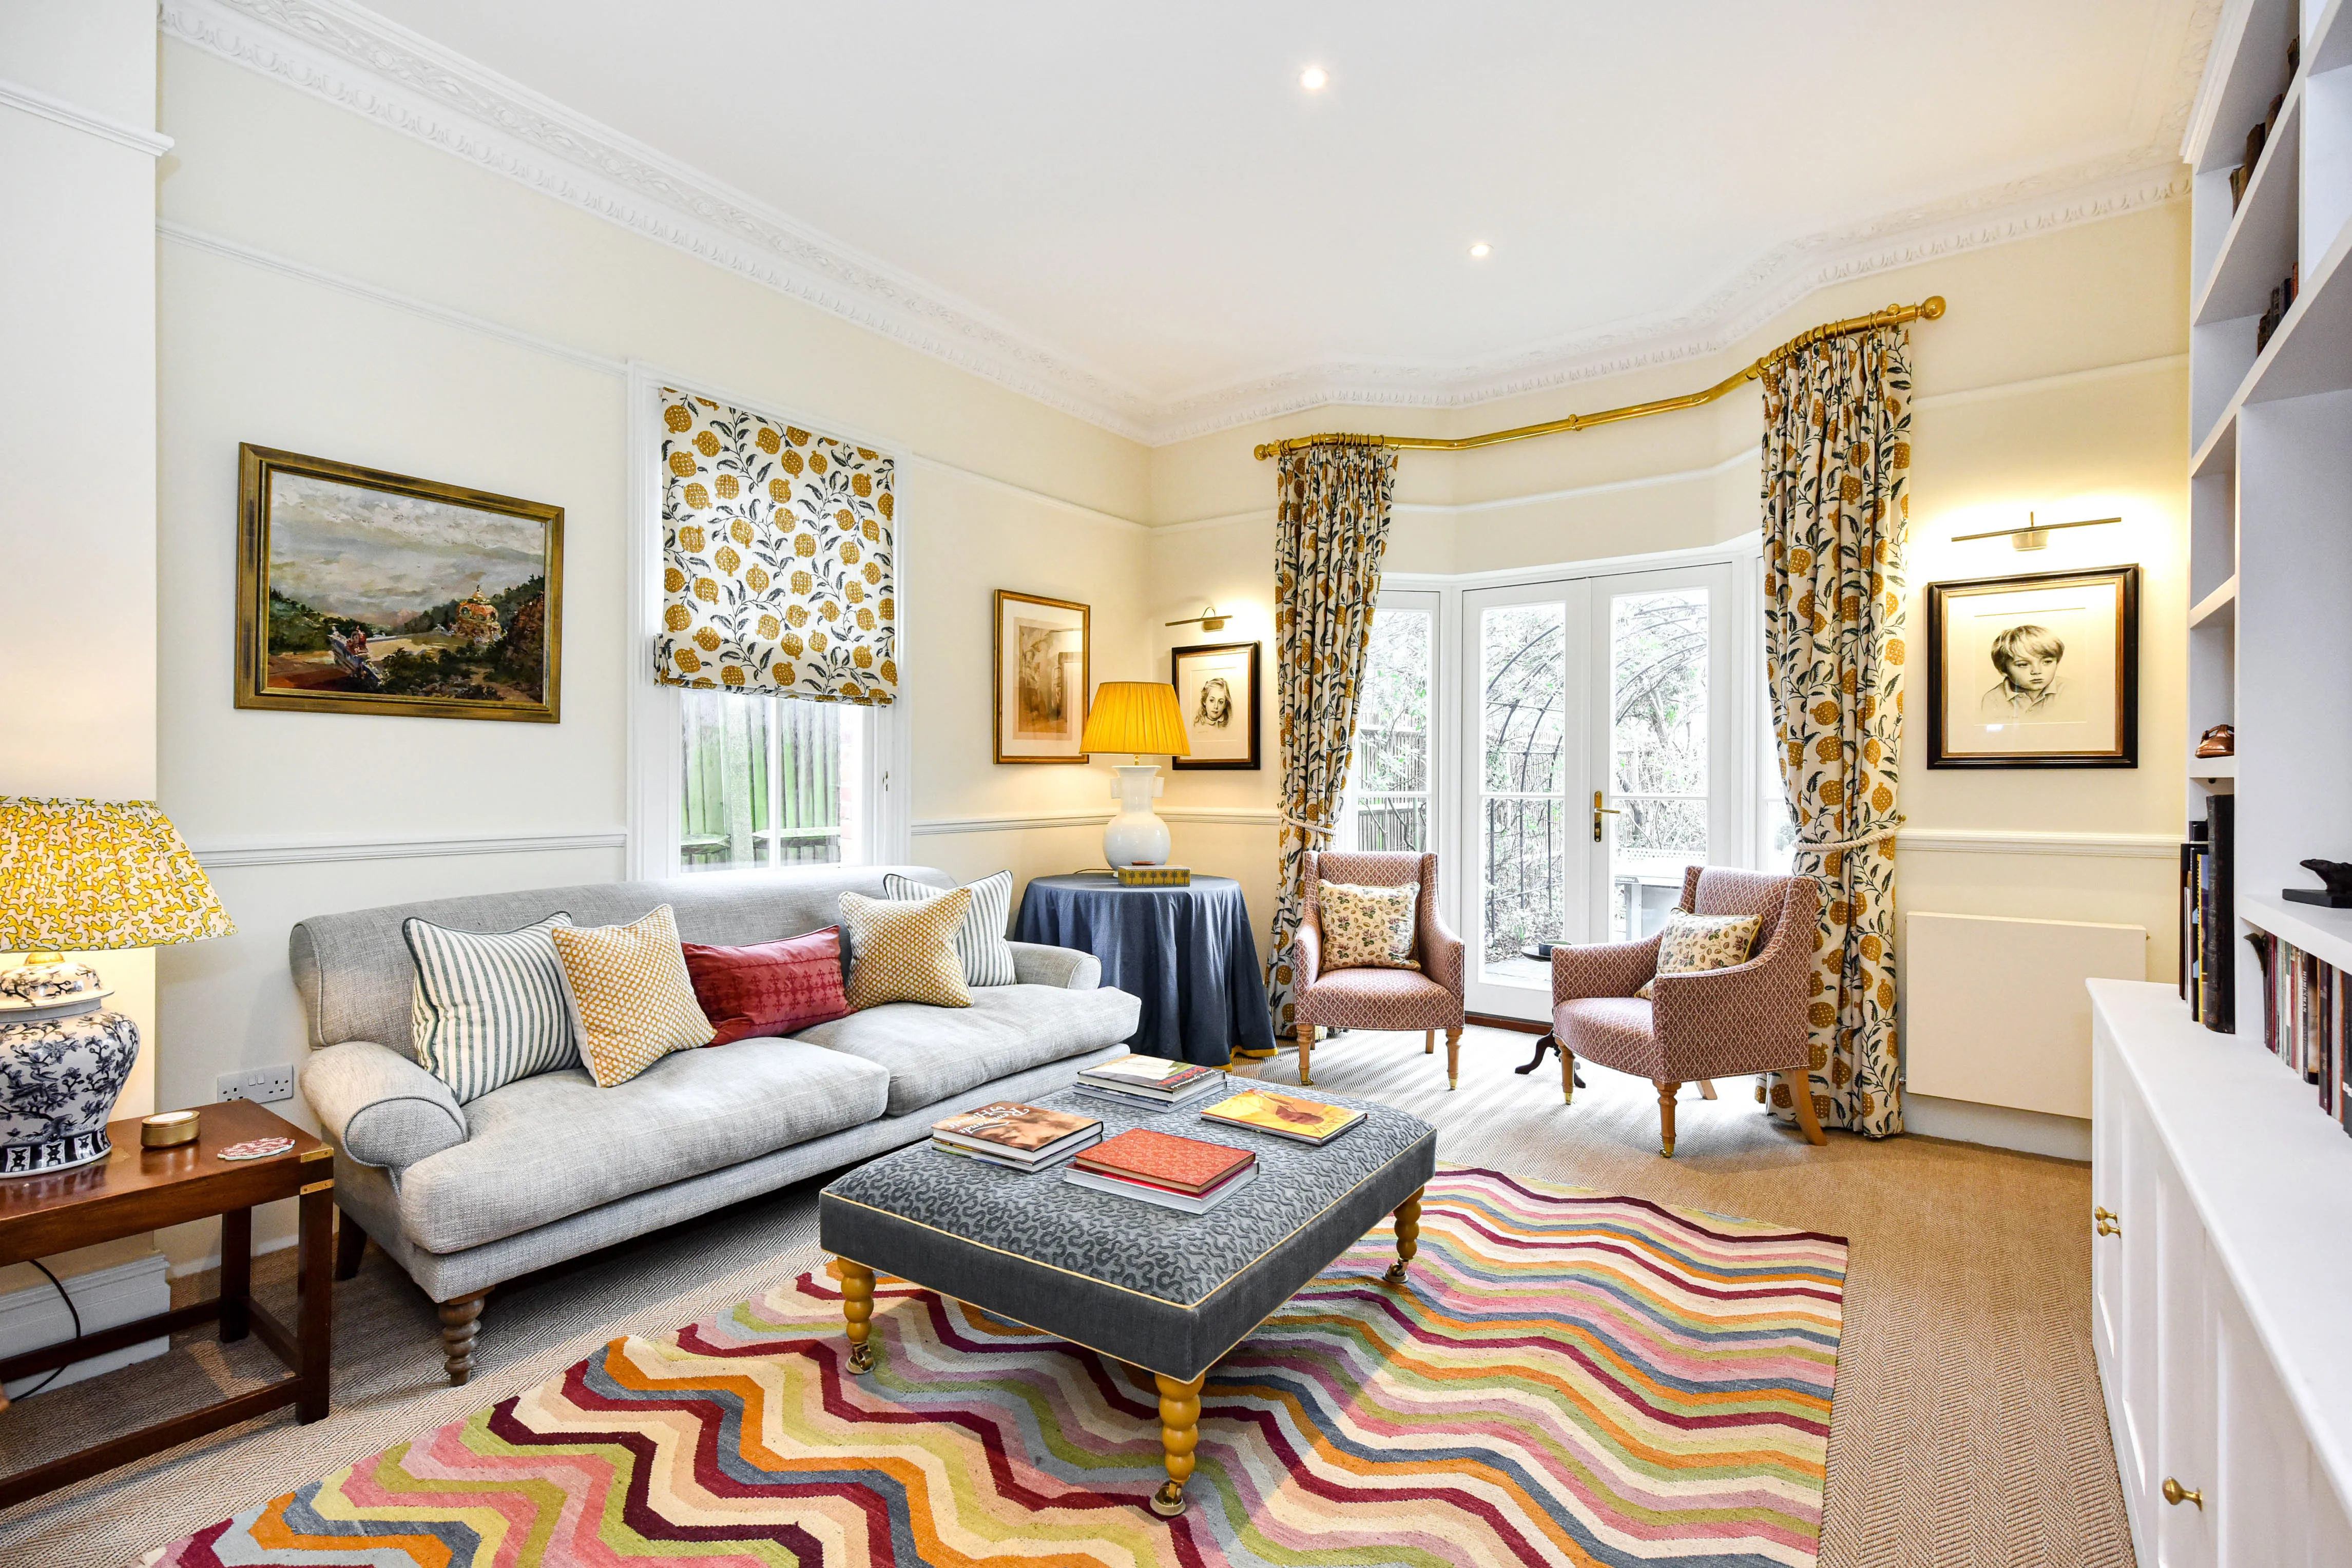 Westover Road, holiday home in Wandsworth, London